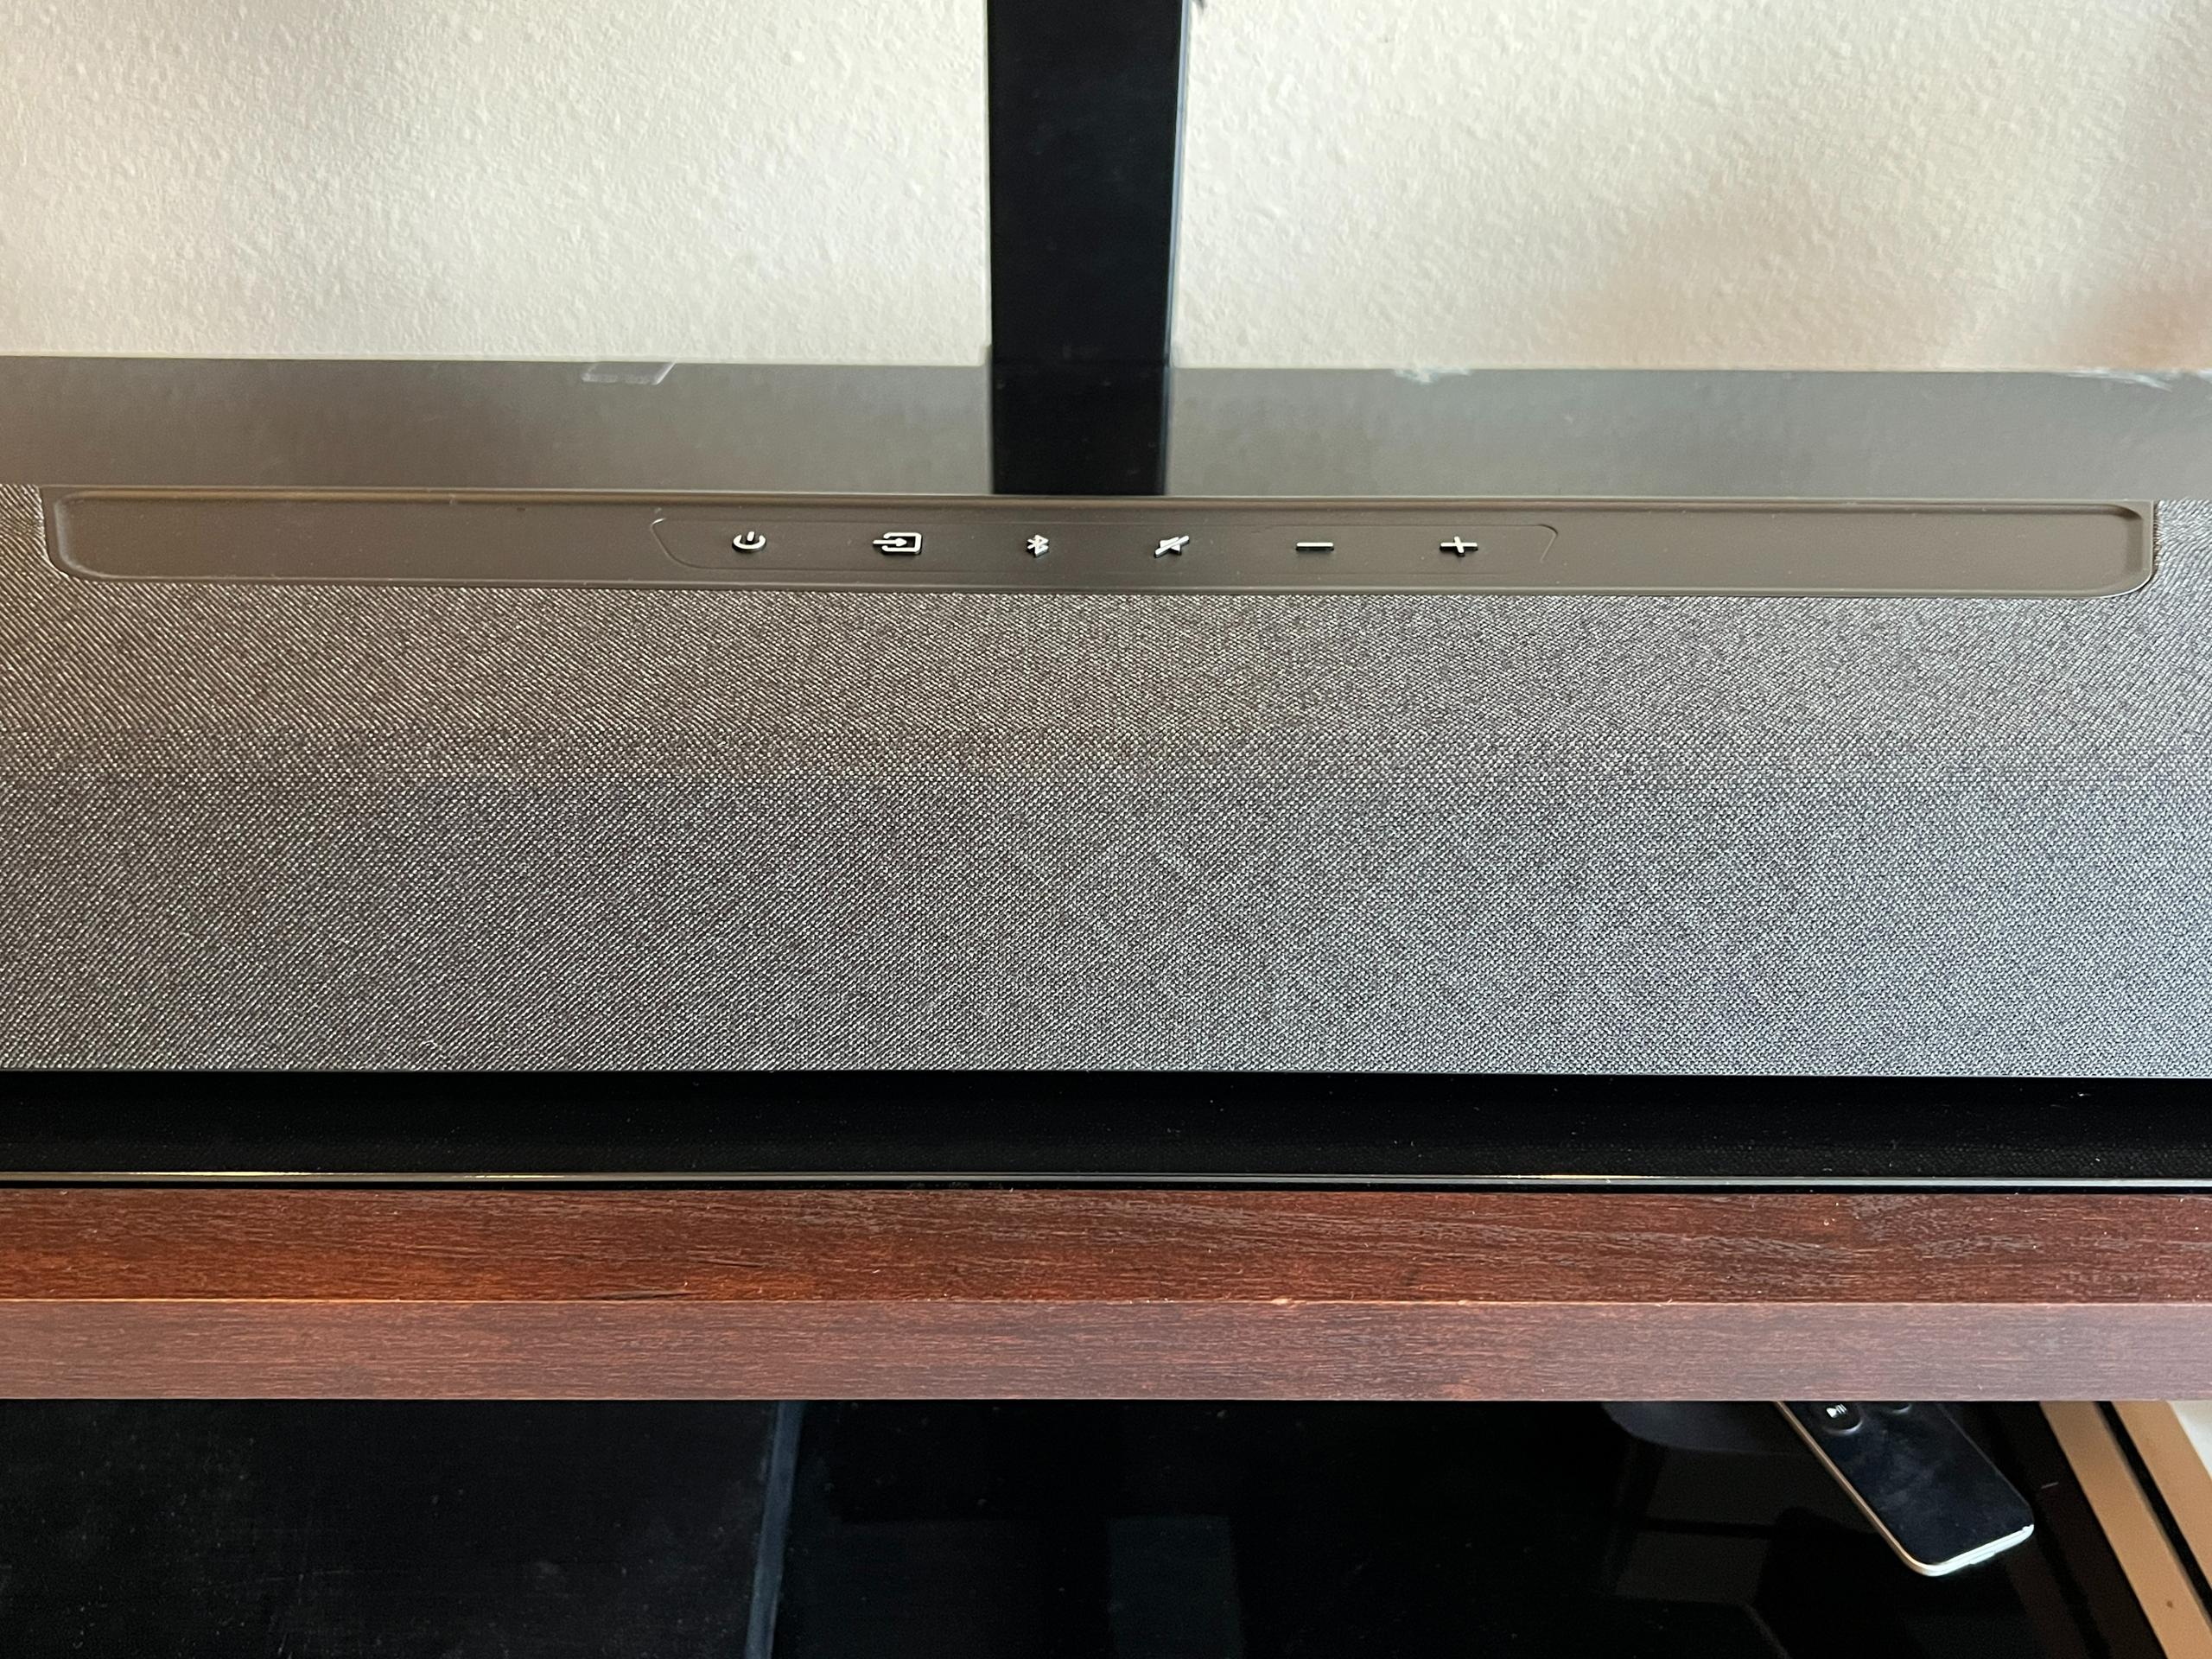 The Polk Magnifi Max AX soundbar controls are shown with the bar atop a black and brown TV console.